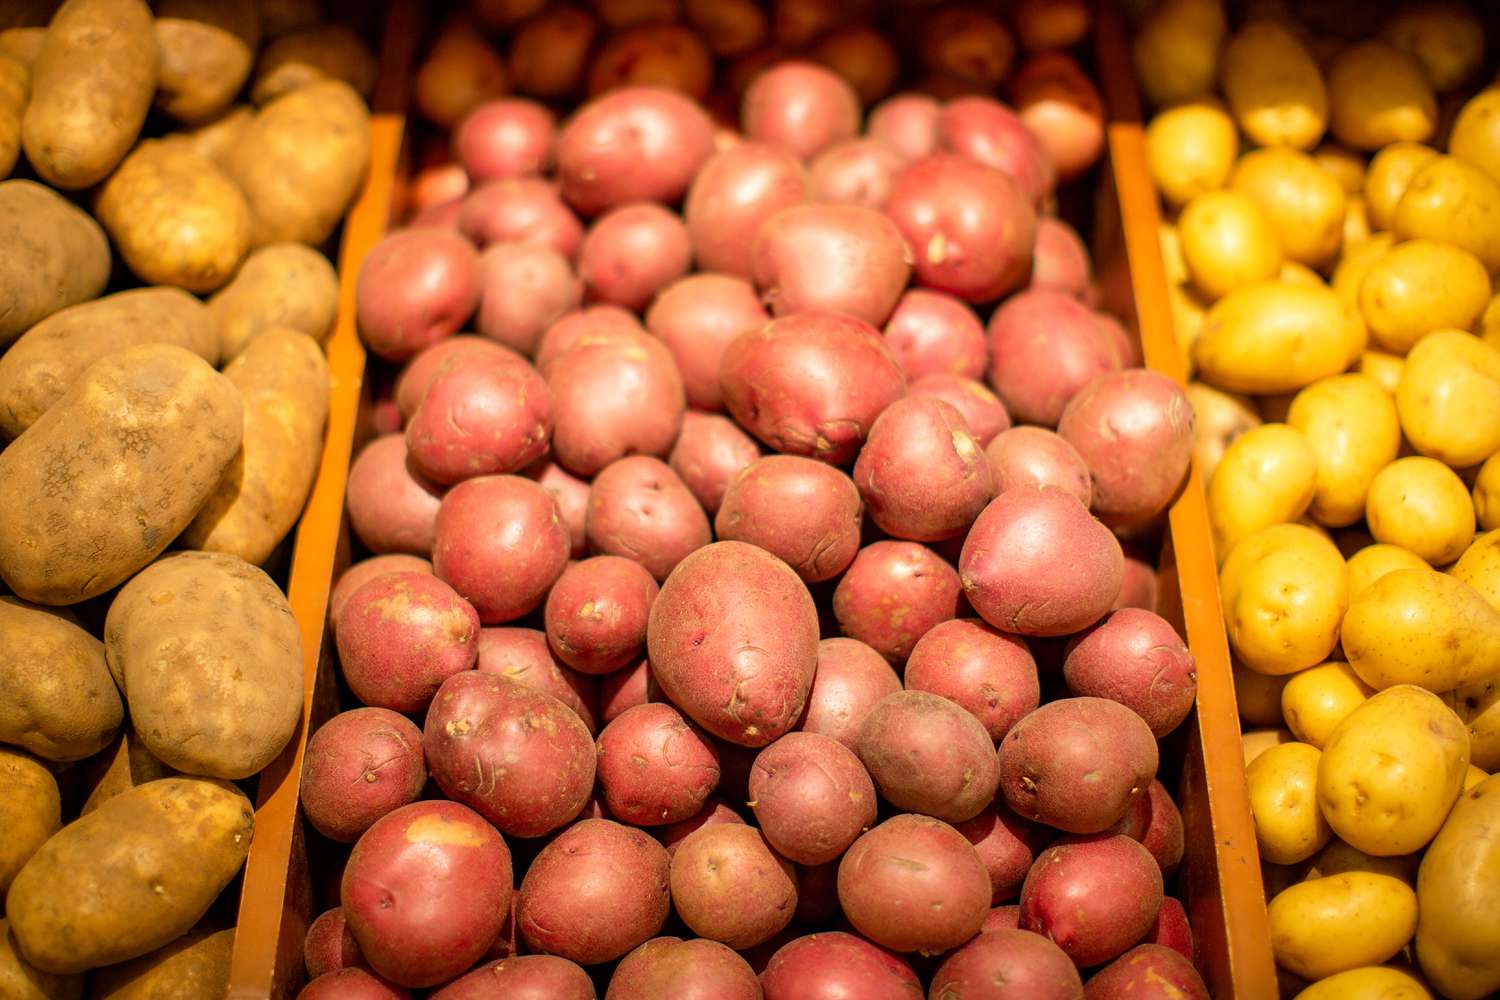 Russet, red new, and Yukon Gold fresh potatoes in a grocery store